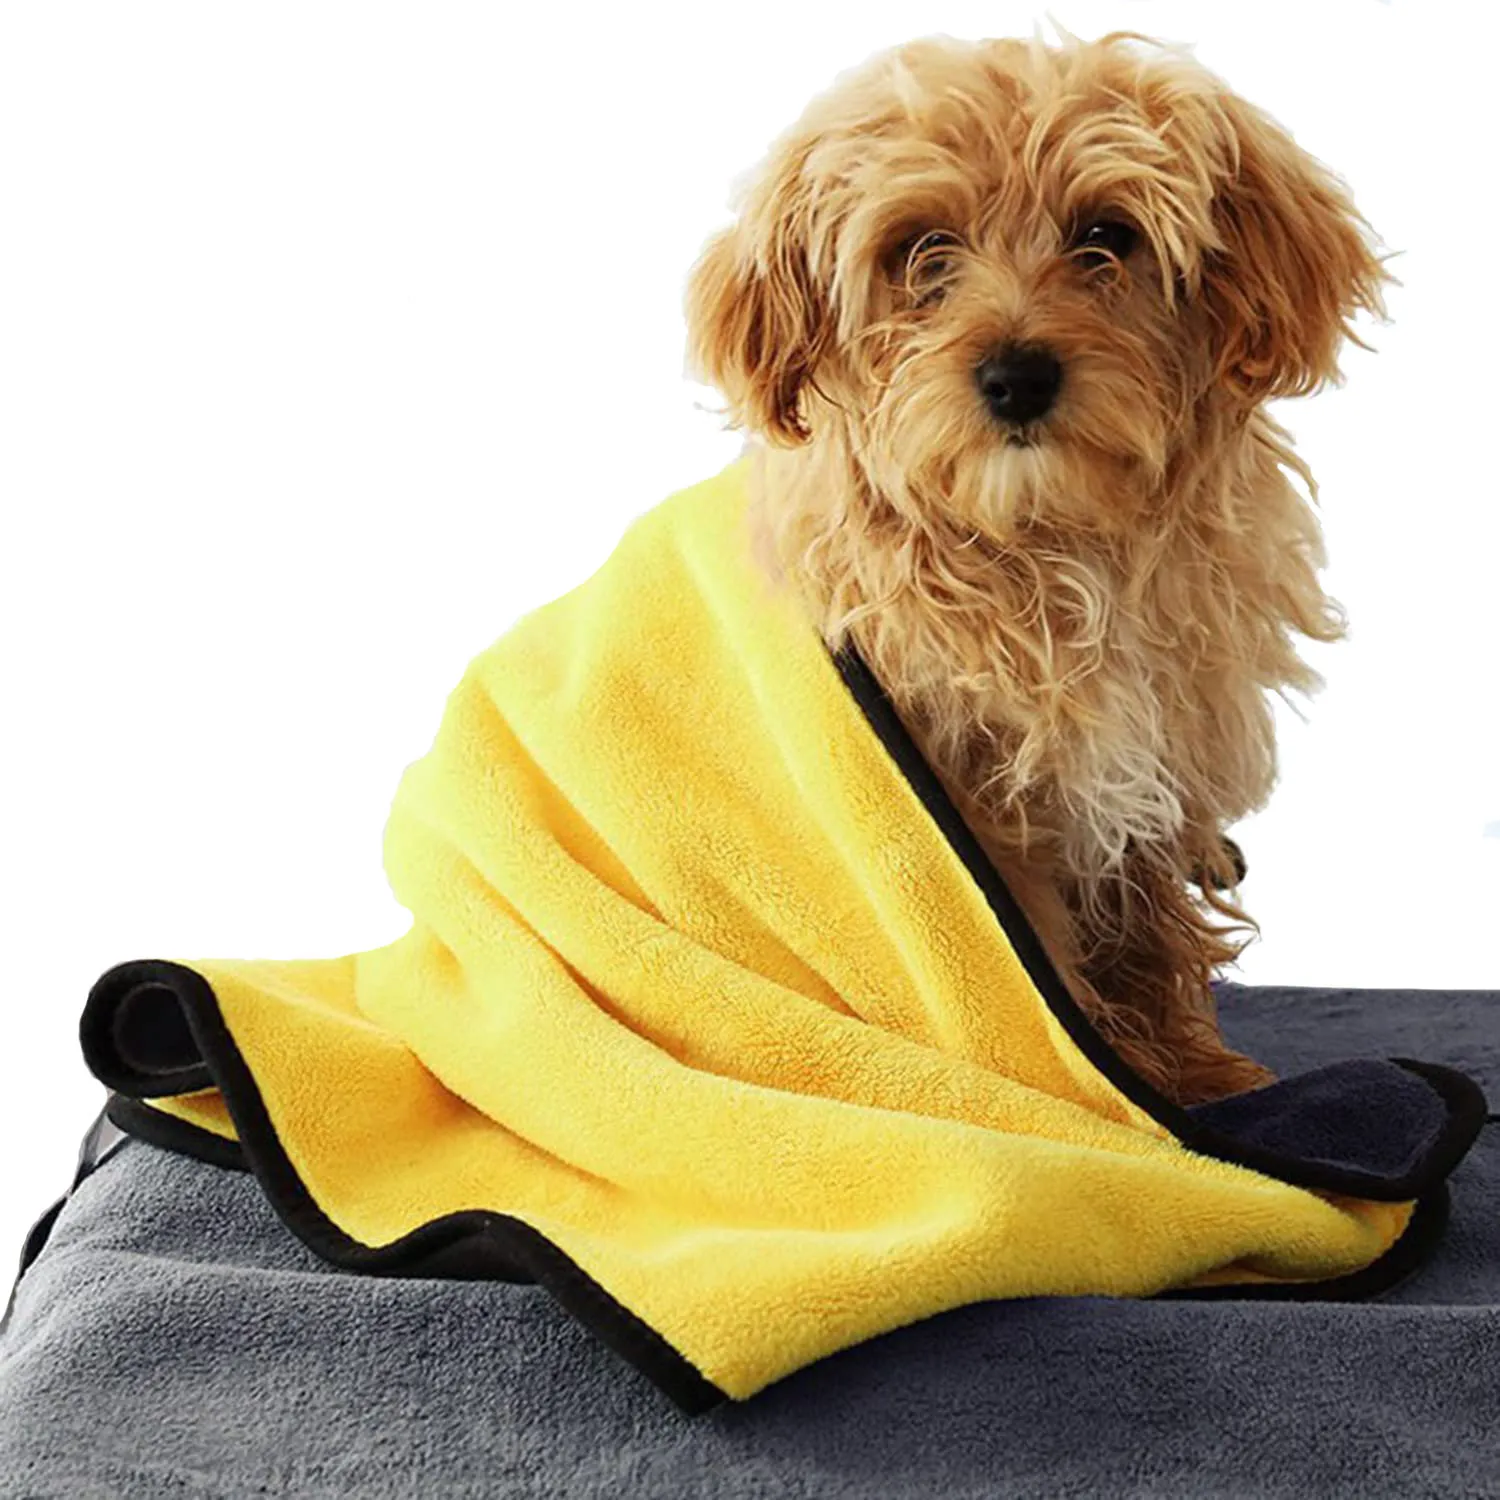 

Most Popular Super Absorbent Quick Drying Microfiber Large Size Pet Cat And Dog Bath Towel Dog Towel, Yellow and gray